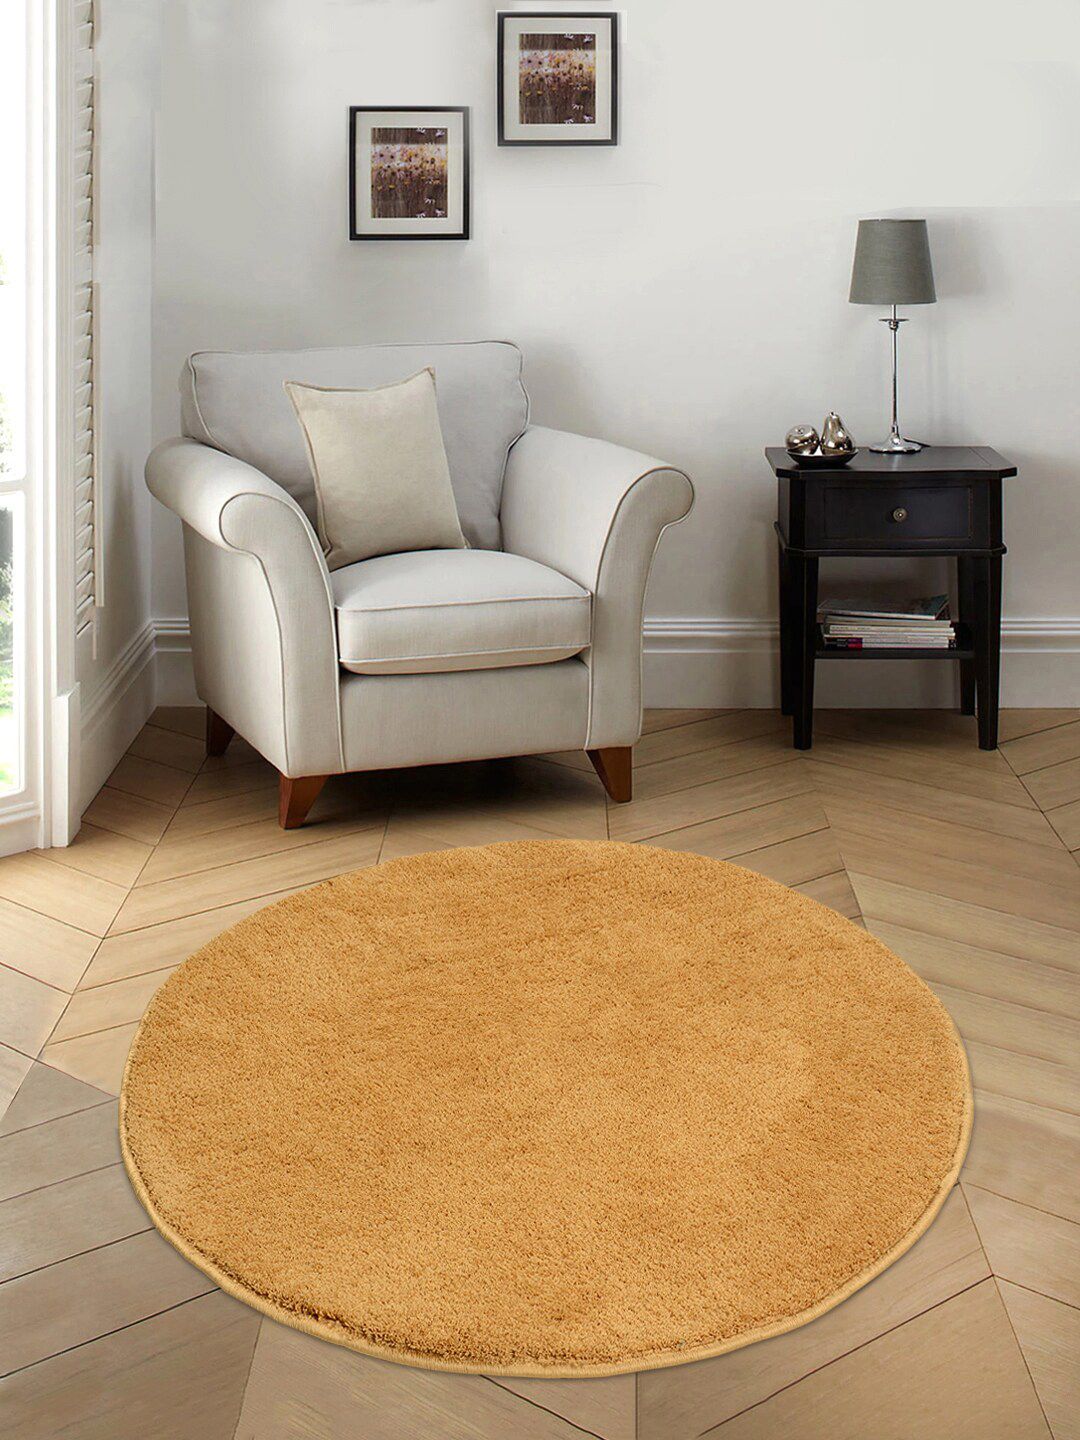 Saral Home Golden Solid Cotton Shaggy Yarn Anti-Skid Round Floor Mat Price in India